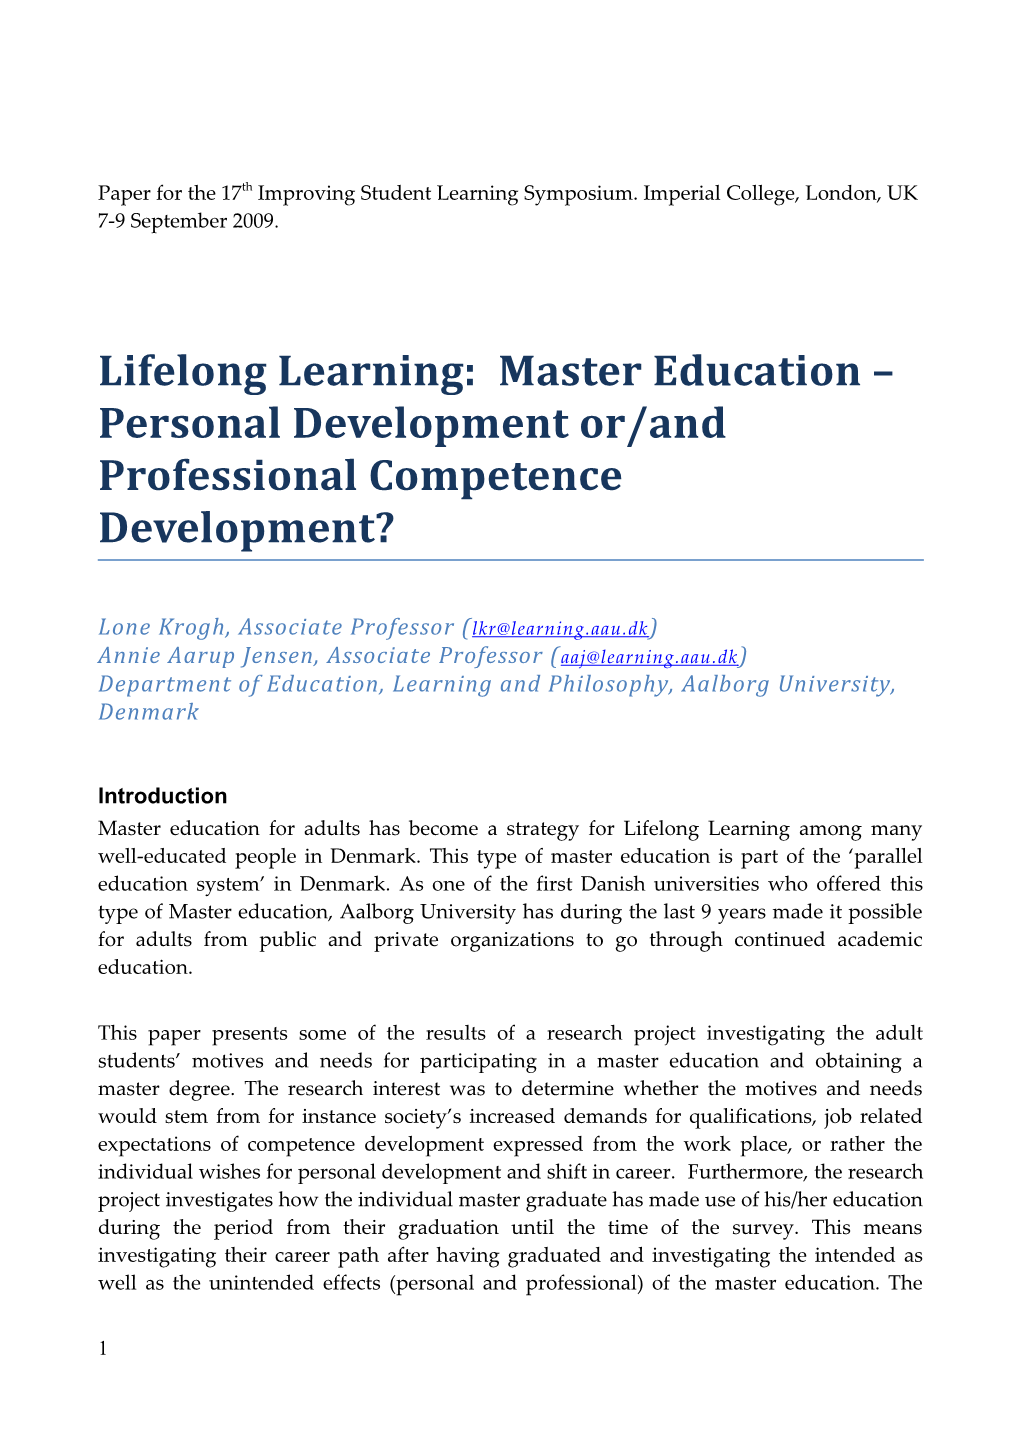 Master Education As a Lifelong Learning Strategy